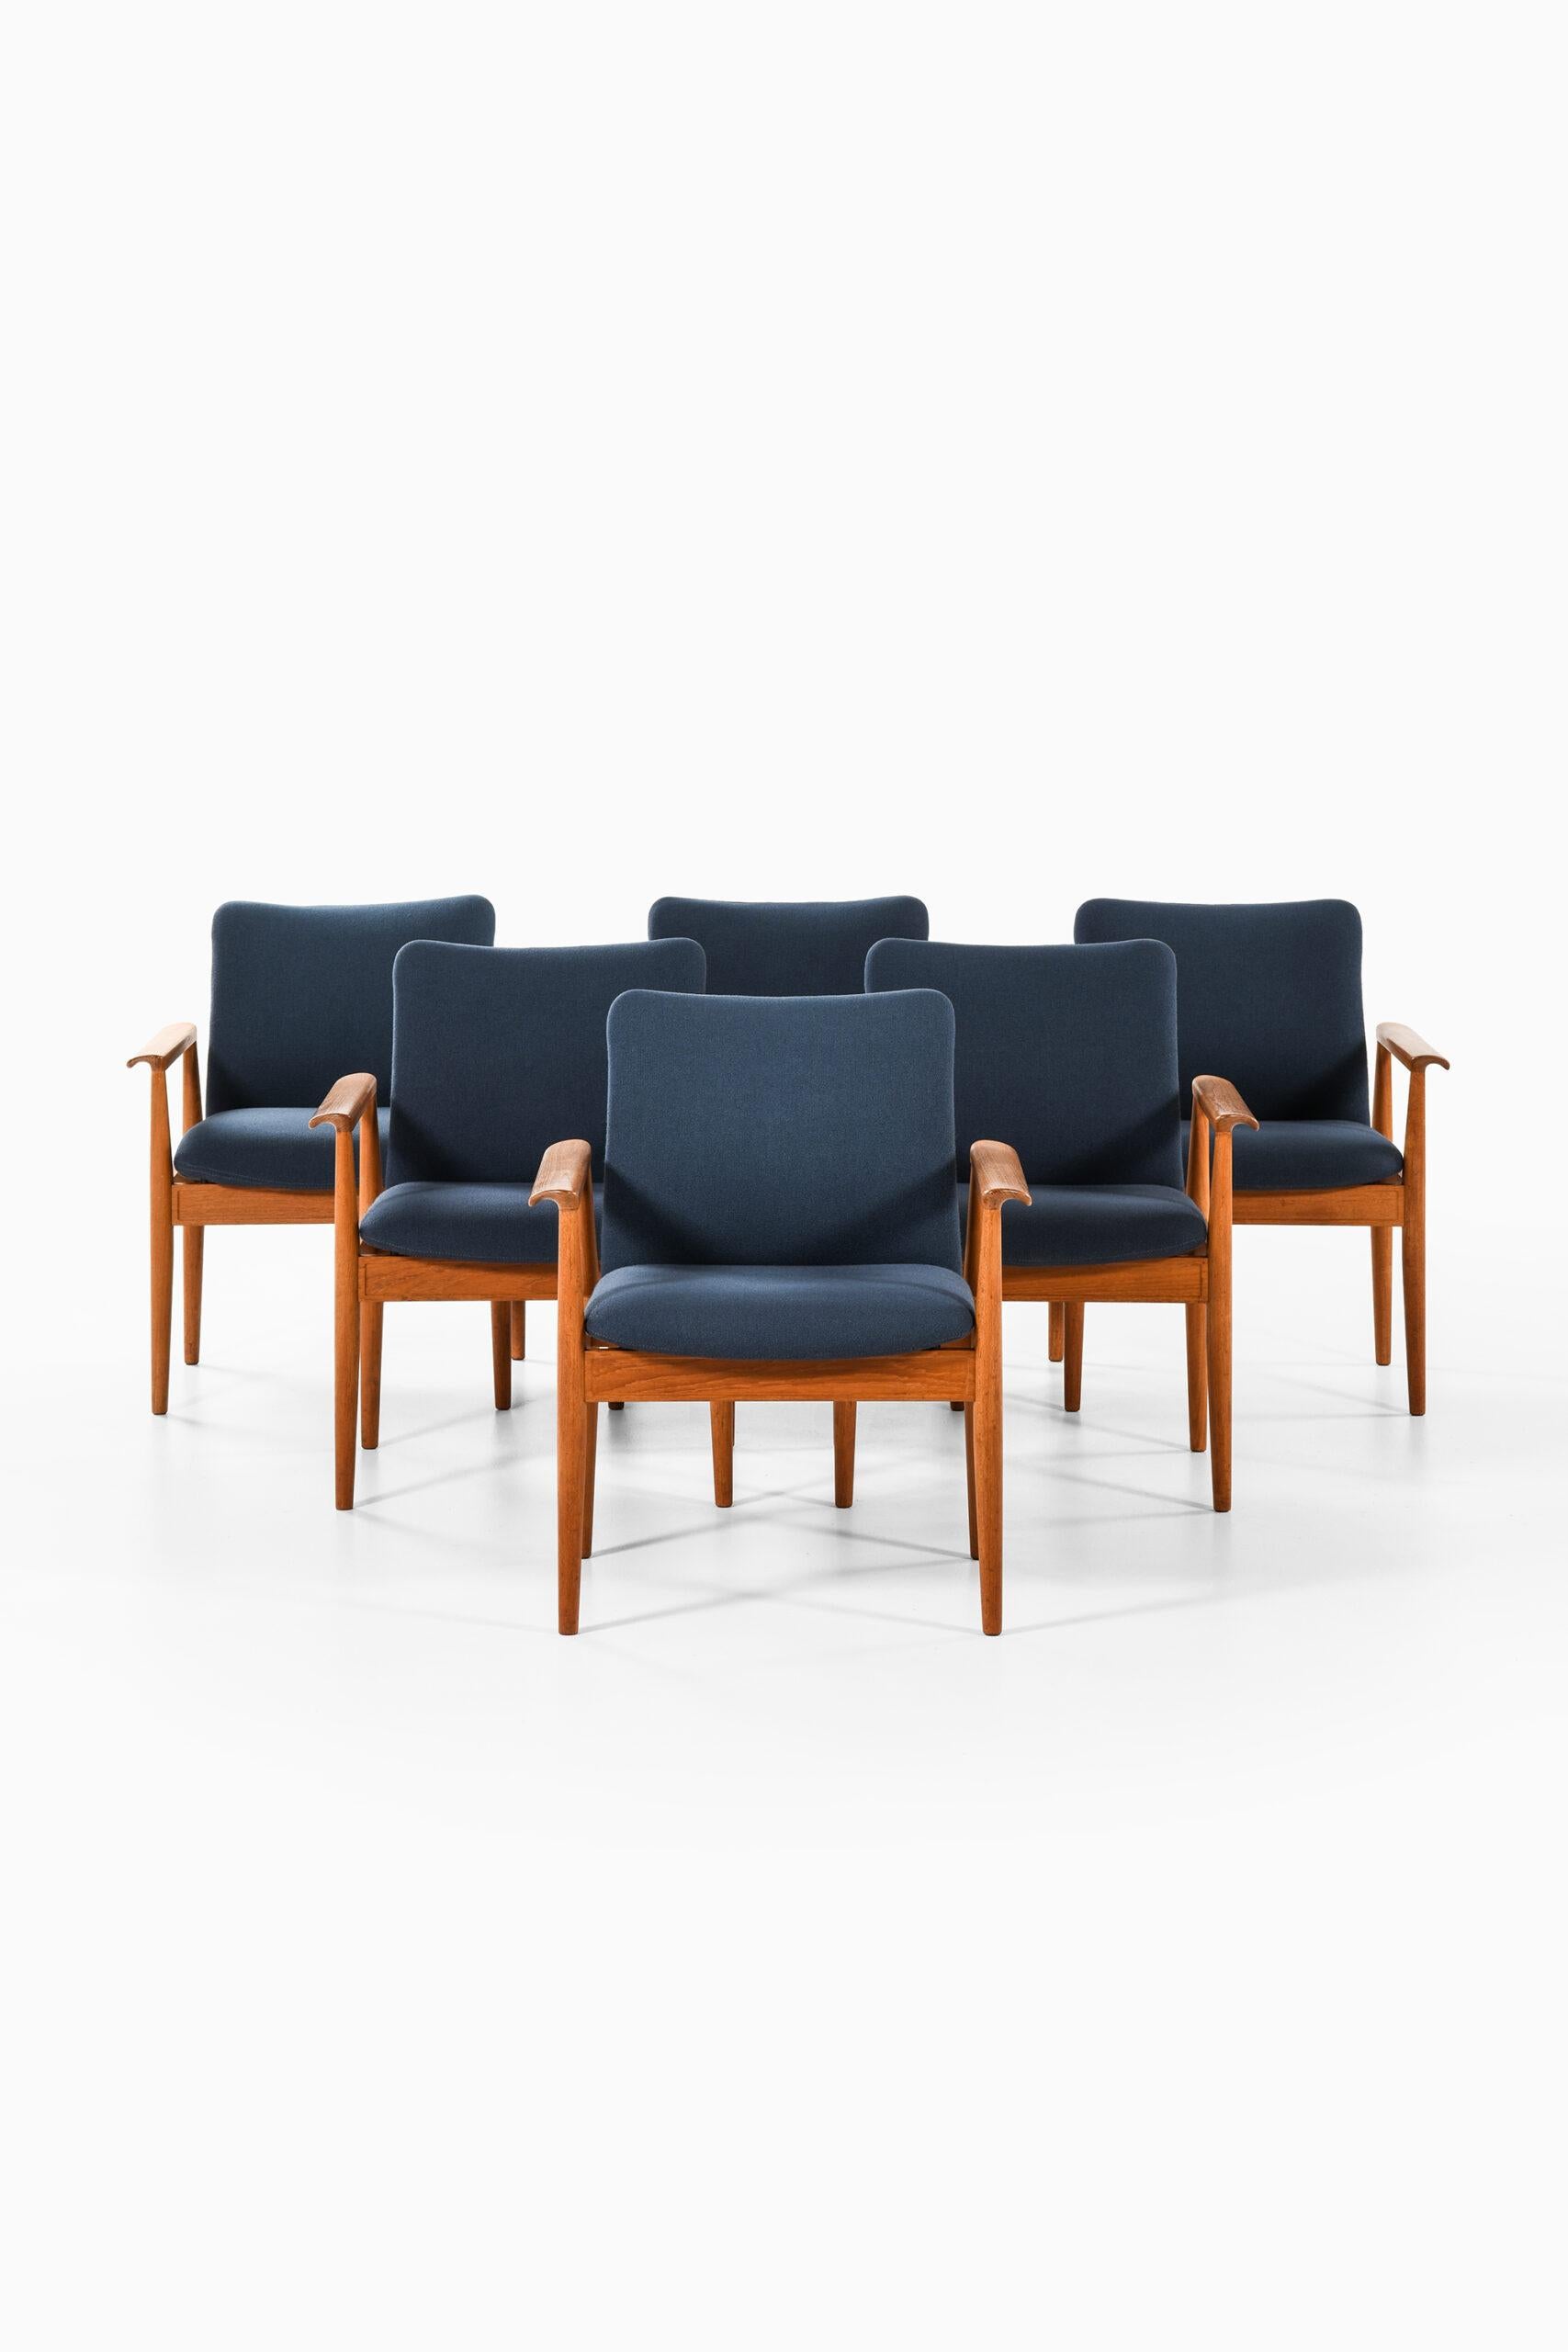 Rare set of 6 armchairs model FD 209 / Diplomat chairs designed by Finn Juhl. Produced by Cado in Denmark.